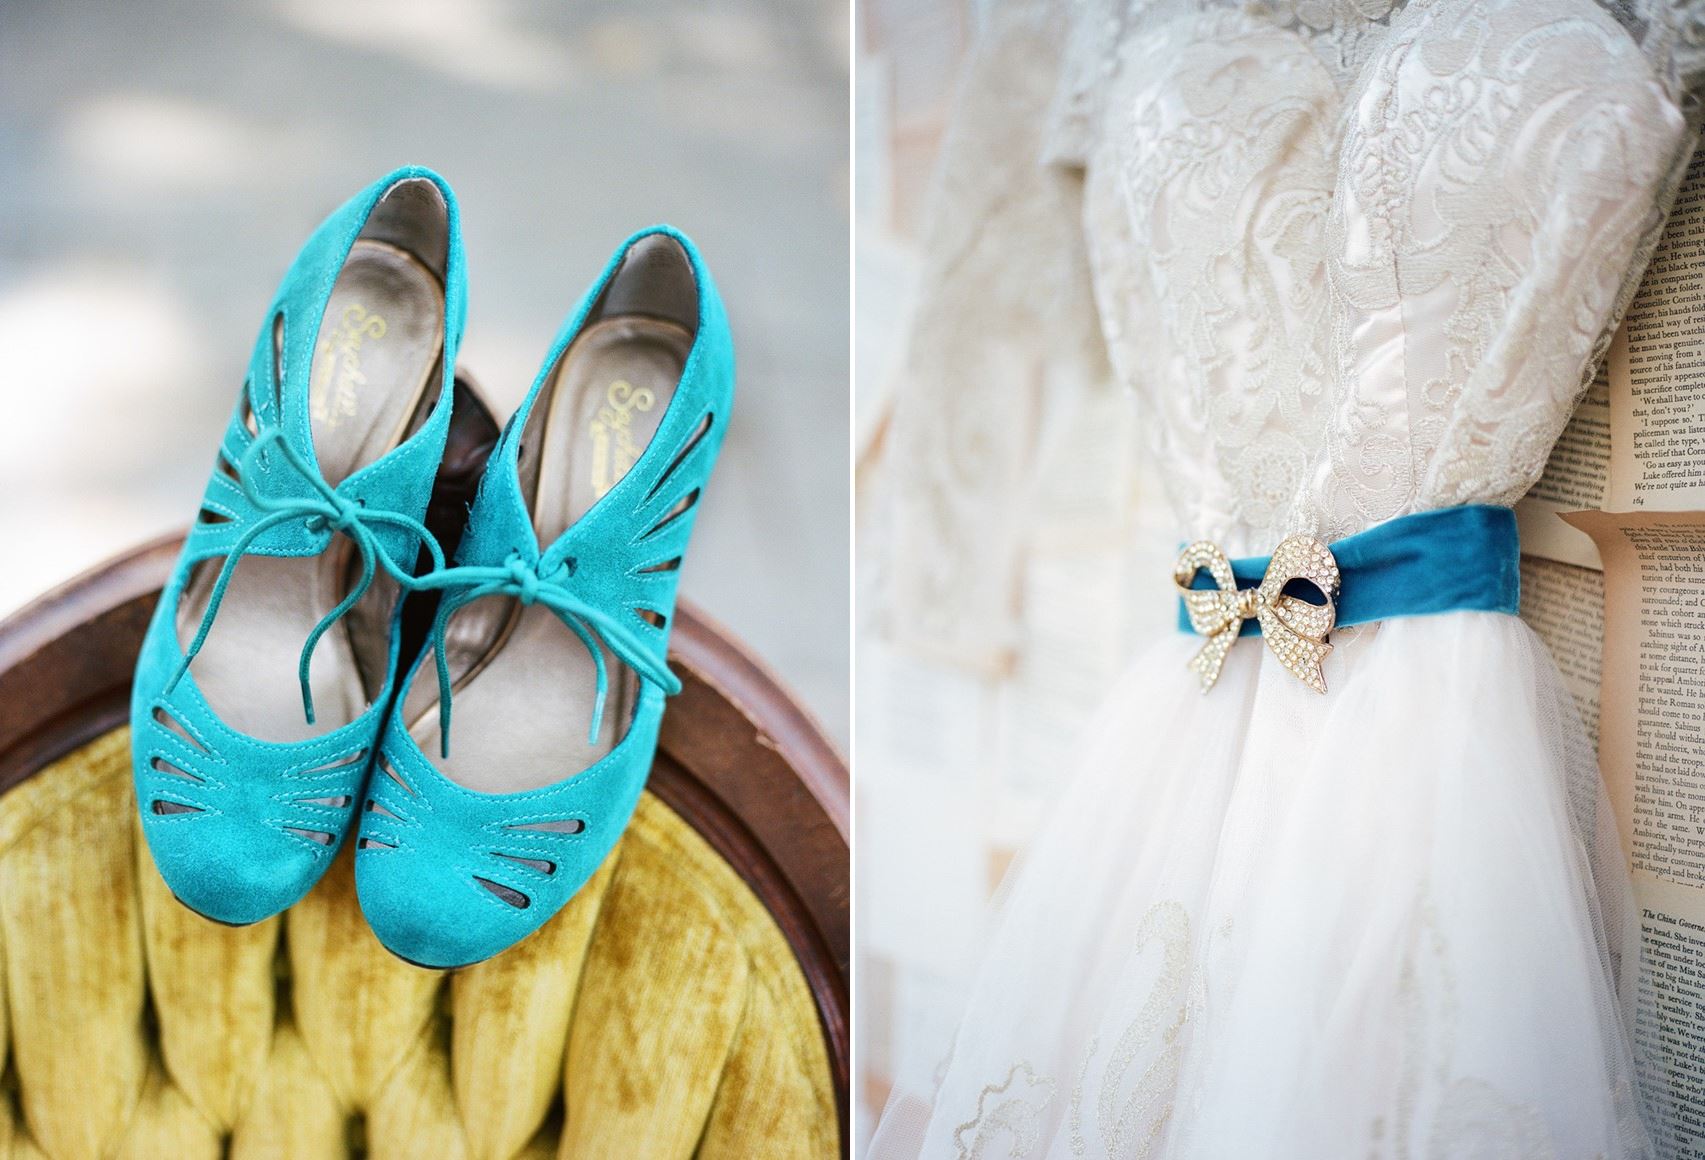 Vintage Bridal Shoes - Mid-Century Vintage Wedding Shoot Inspired by Penguin Books